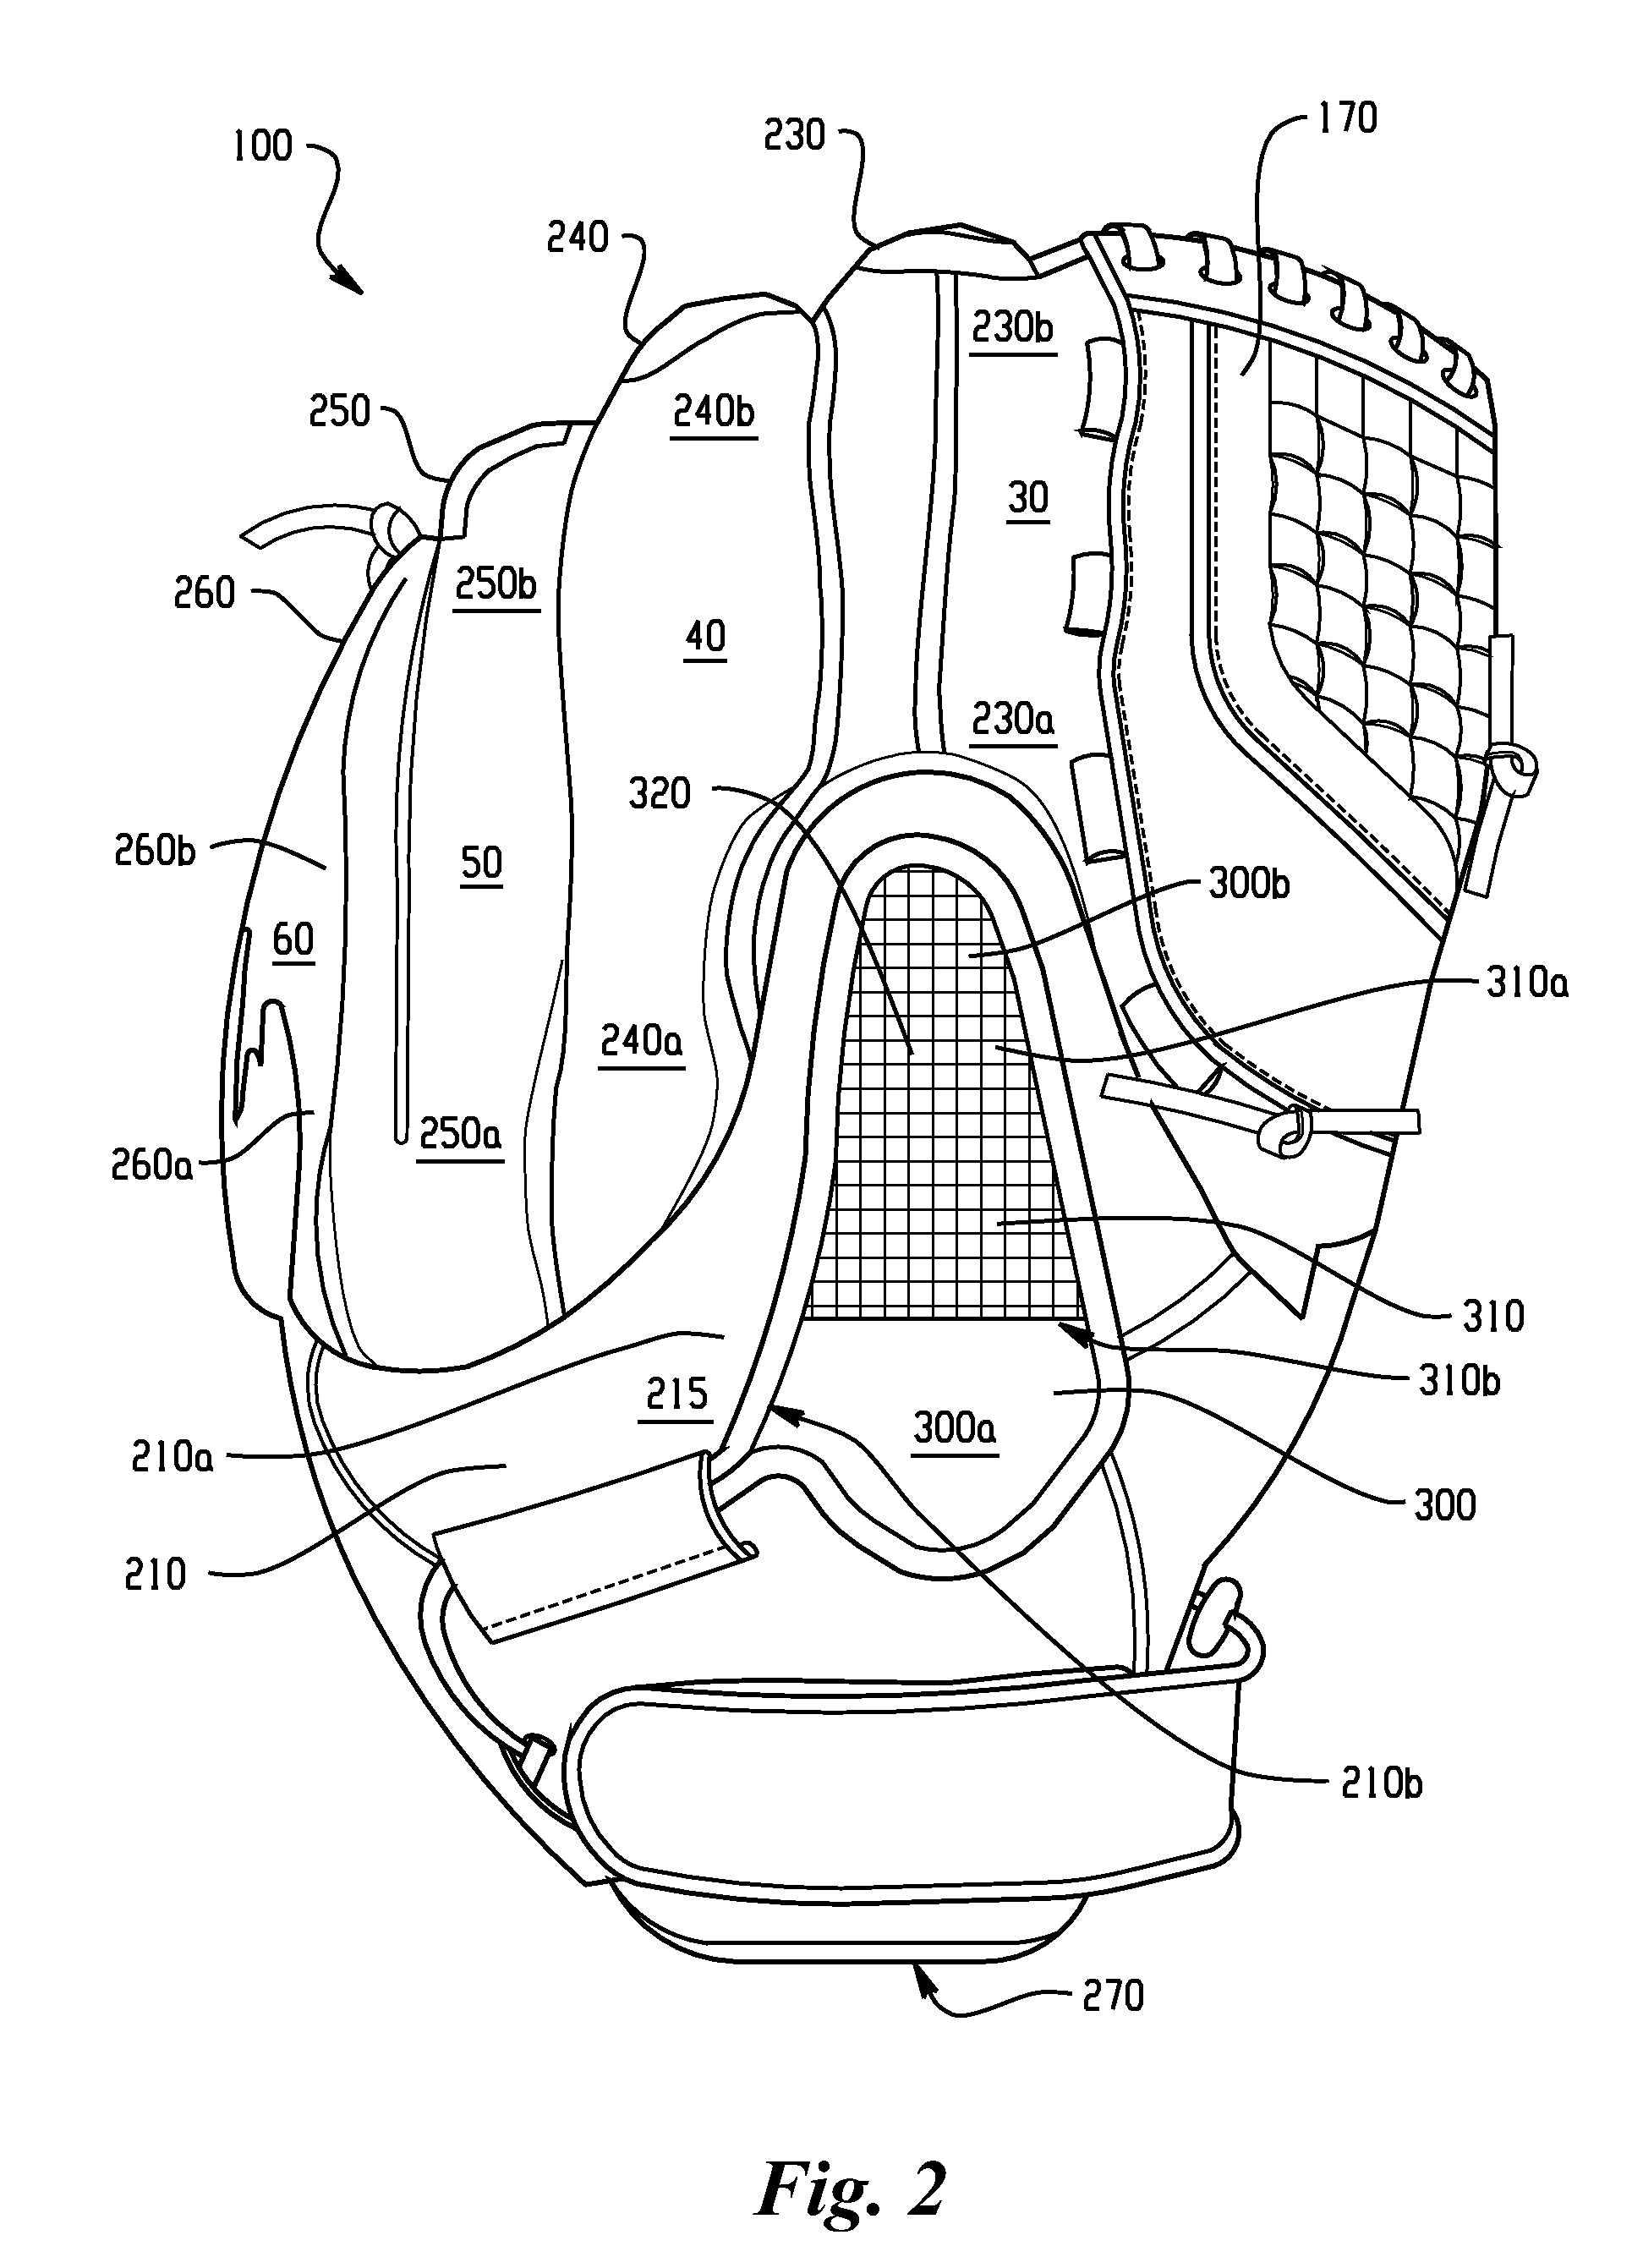 Baseball gloves with an adaptable index finger stall and methods of making same